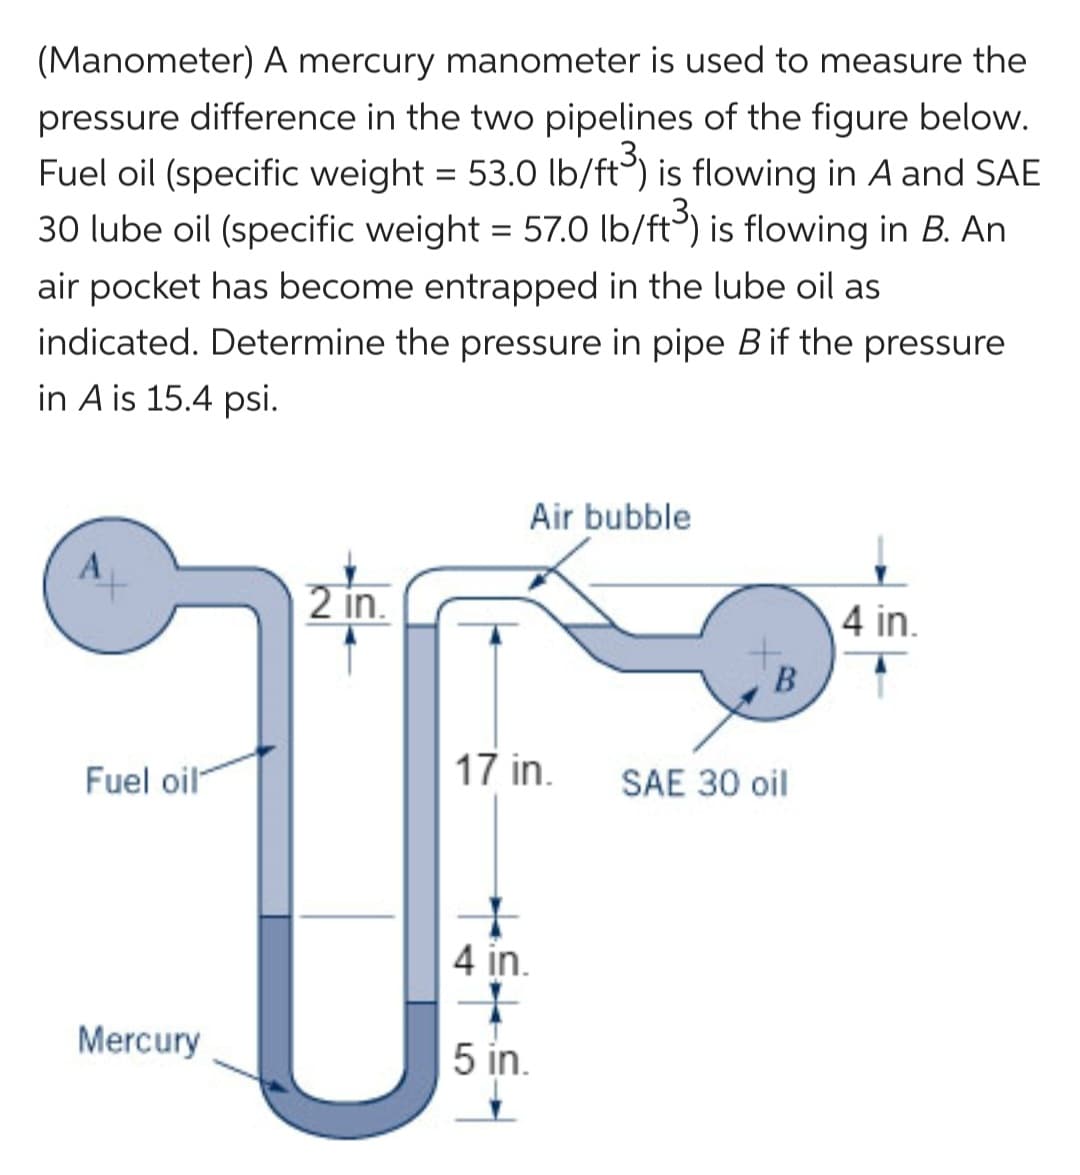 (Manometer) A mercury manometer is used to measure the
pressure difference in the two pipelines of the figure below.
Fuel oil (specific weight = 53.0 lb/ft³) is flowing in A and SAE
30 lube oil (specific weight = 57.0 lb/ft³) is flowing in B. An
air pocket has become entrapped in the lube oil as
indicated. Determine the pressure in pipe B if the pressure
in A is 15.4 psi.
Fuel oil
Mercury
2 in.
Air bubble
17 in.
+
4 in.
5 in.
B
SAE 30 oil
4 in.